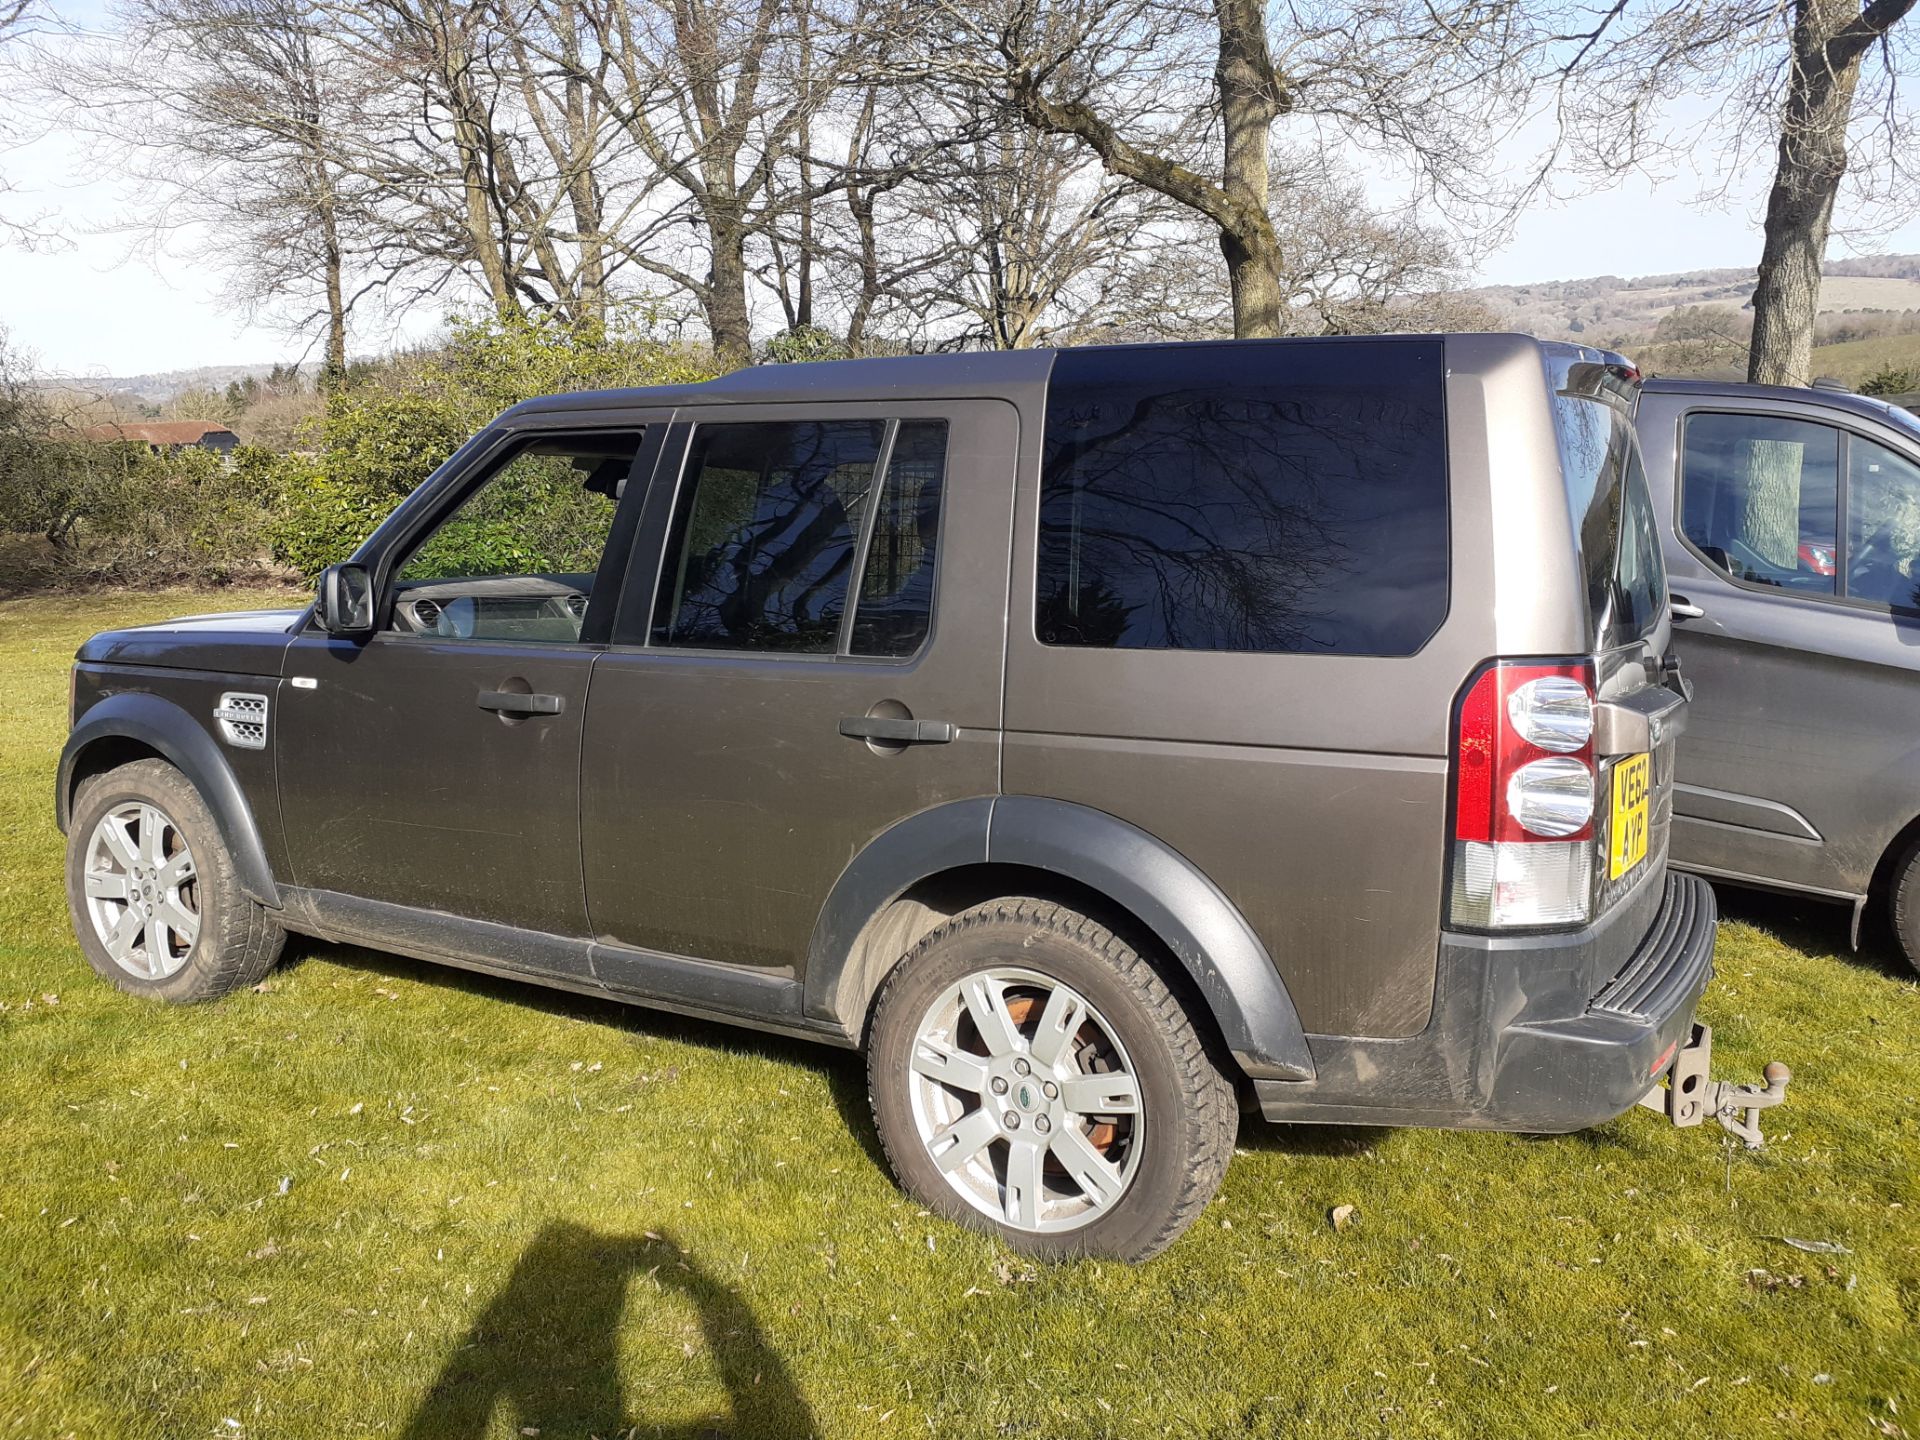 Land Rover Discovery 4 SDV6 Commercial 4x4, Regist - Image 8 of 9